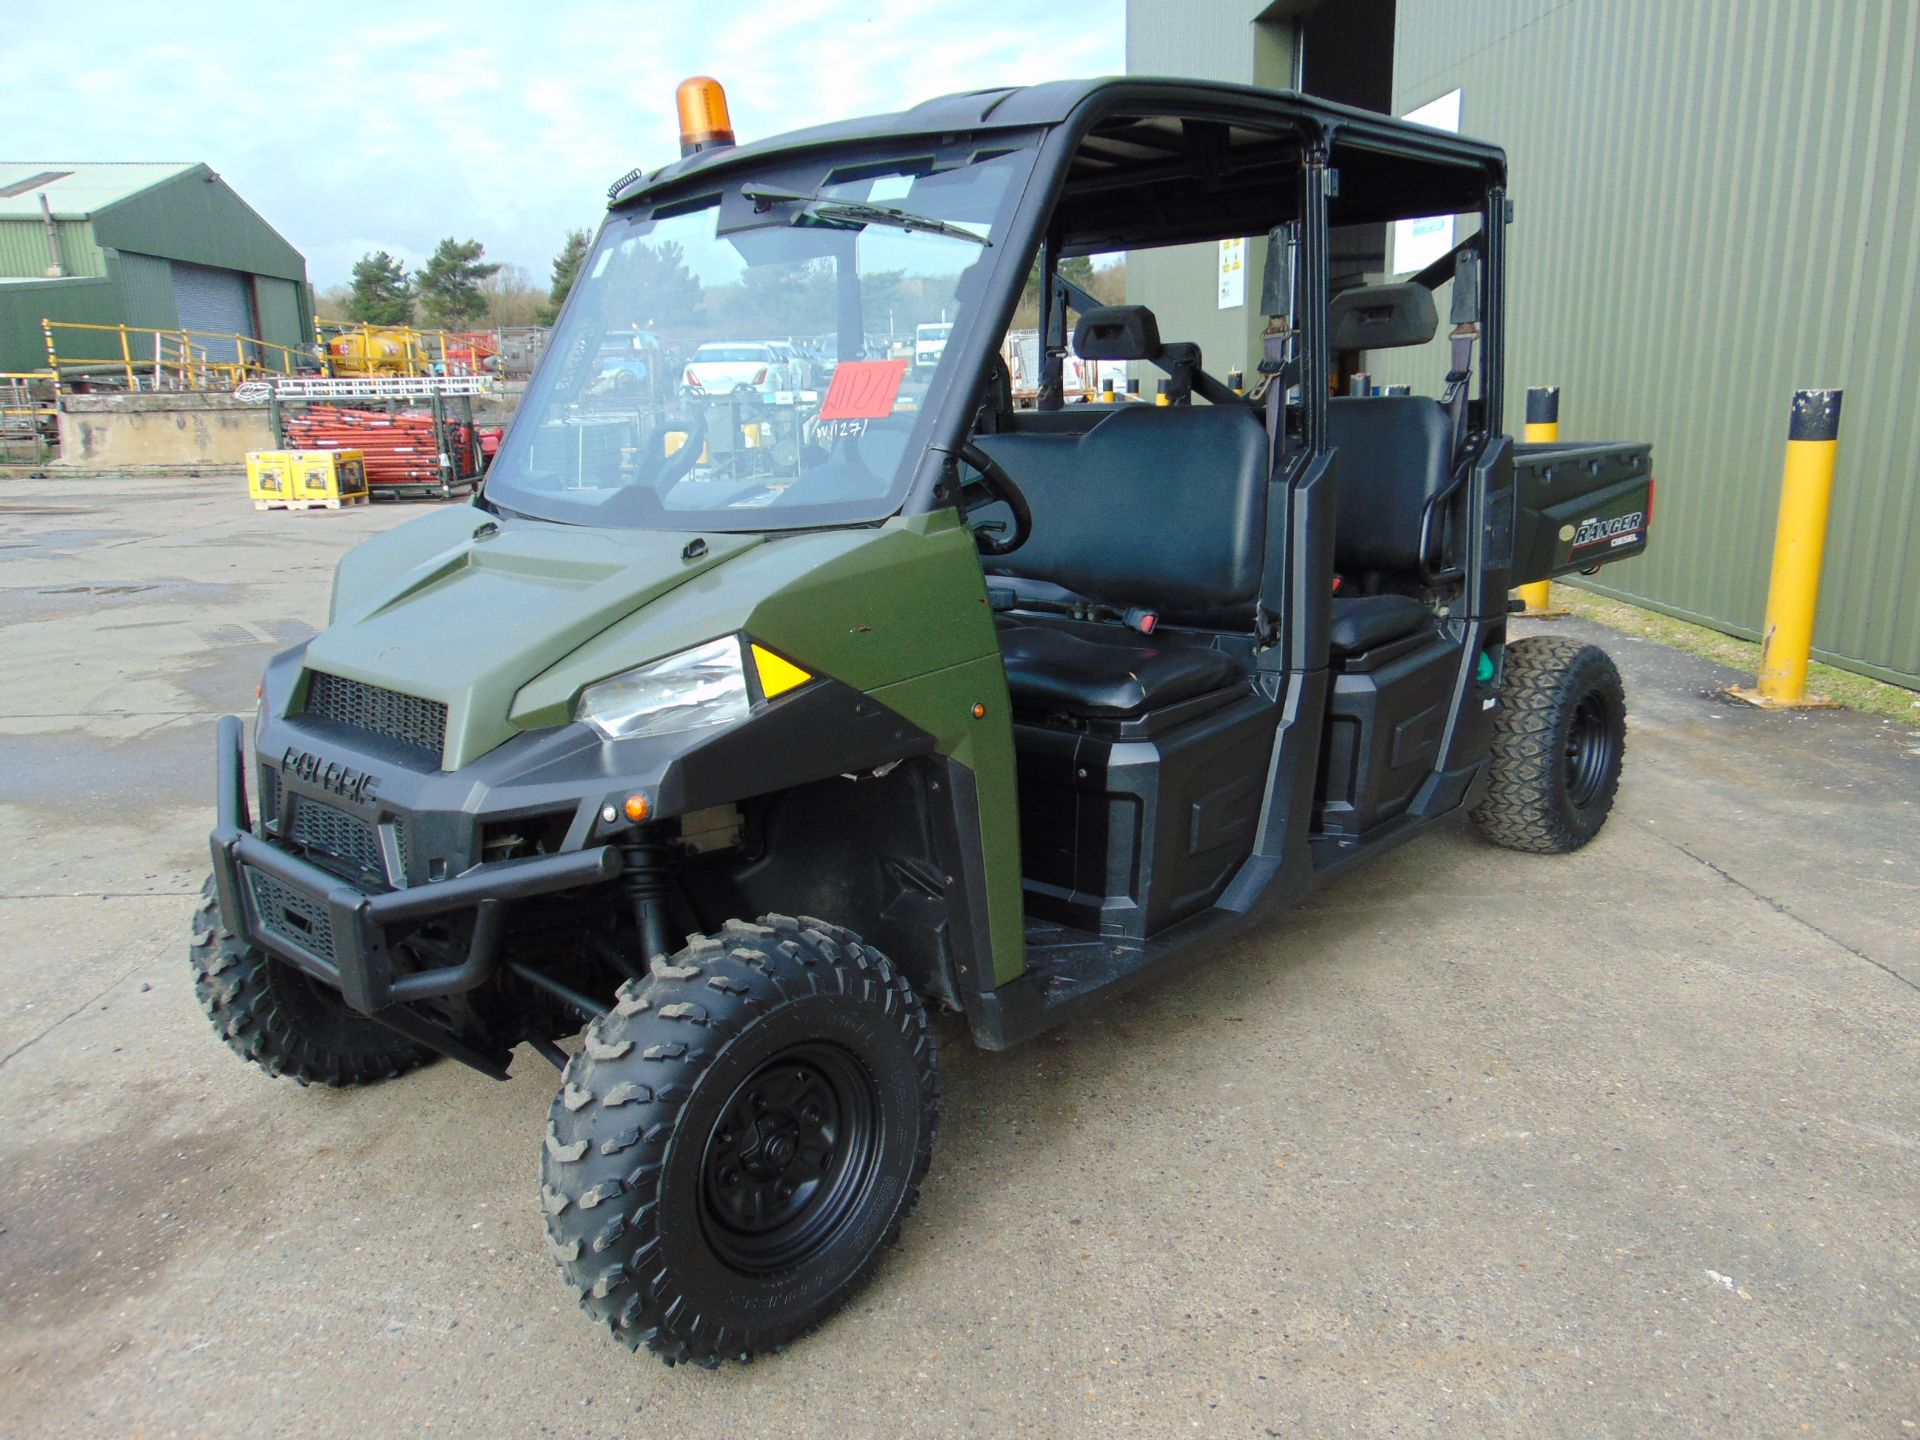 Polaris Ranger Crew Cab Diesel Utility Vehicle 1,190 Hrs only from Govt Dept - Image 4 of 25